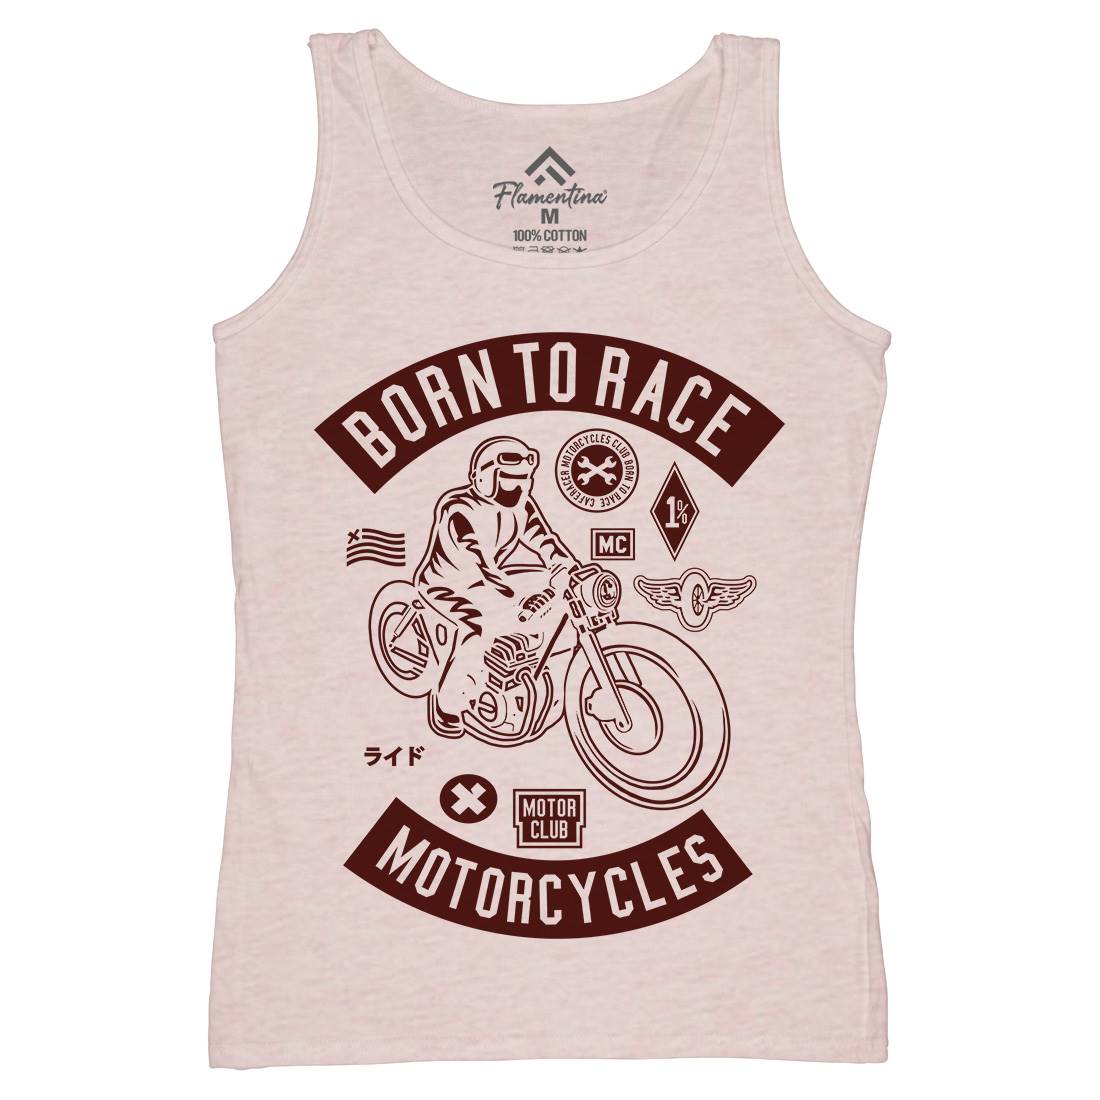 Born To Race Womens Organic Tank Top Vest Motorcycles A210